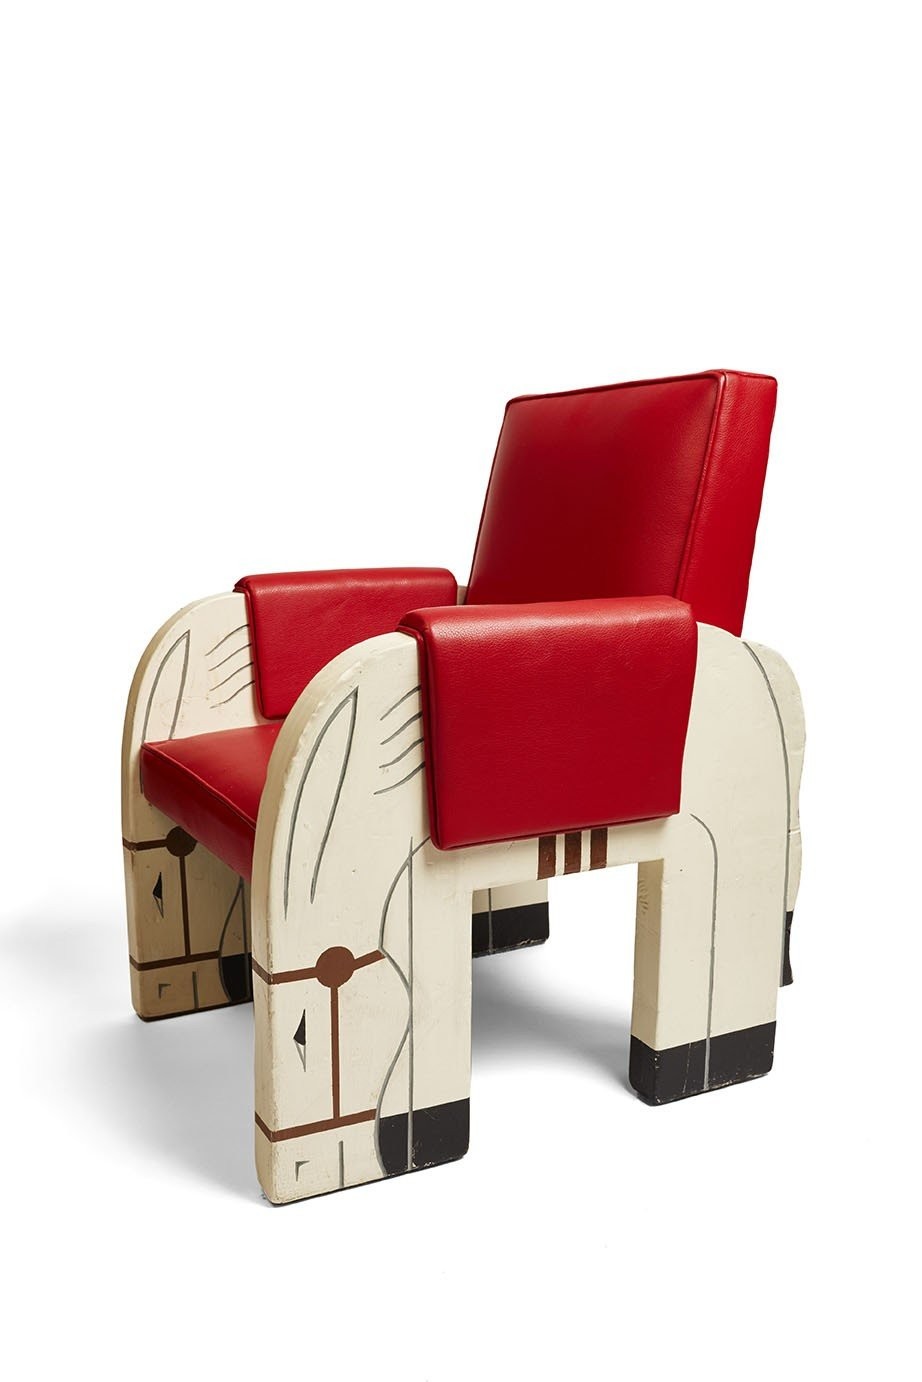 childrens-chair-from-the-first-class-playroom-on-normandie-designed-by-marc-simon-and-jacqueline-duch-france-1934-miottel-museum-berkeley-california.jpg